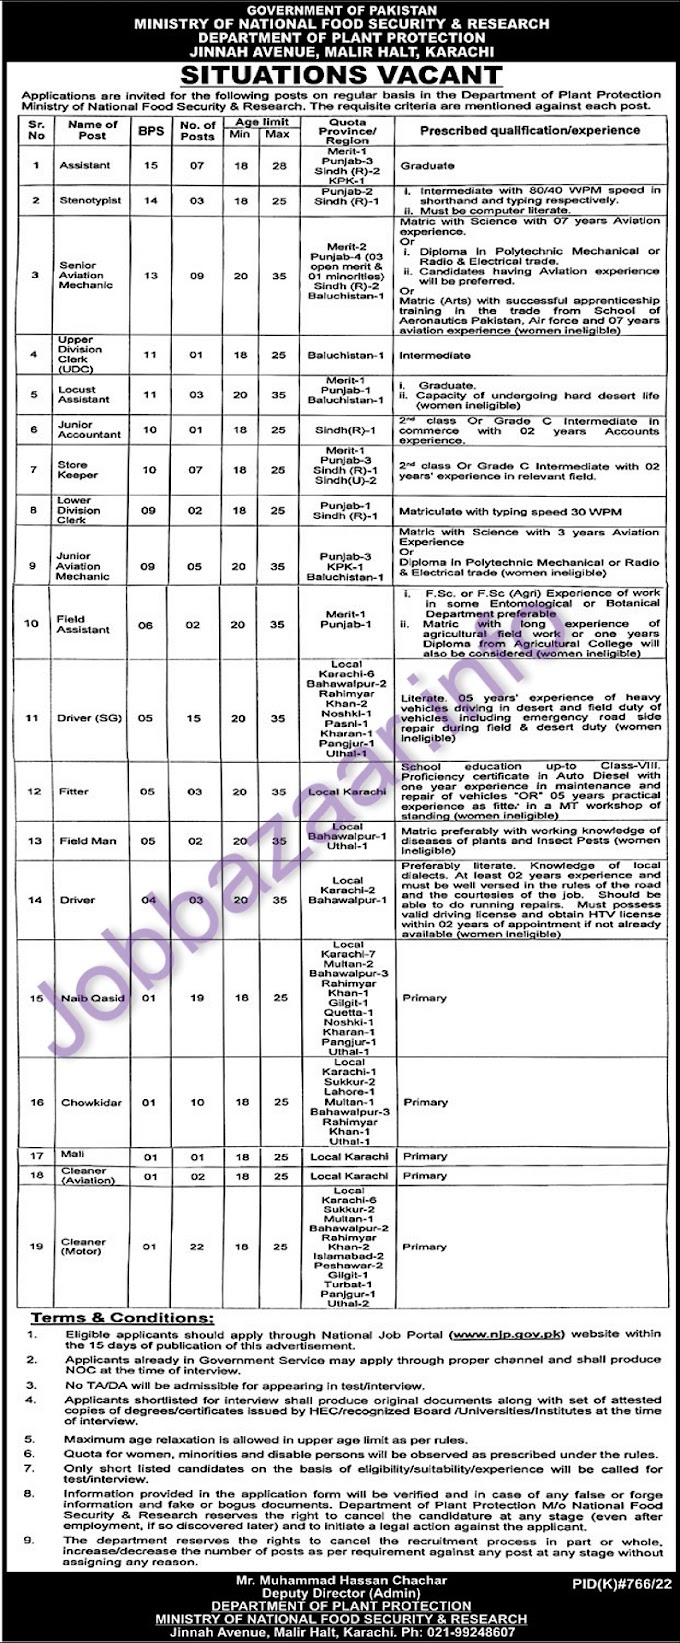 Ministry of National Food Security and Research MNFSR Jobs 2022